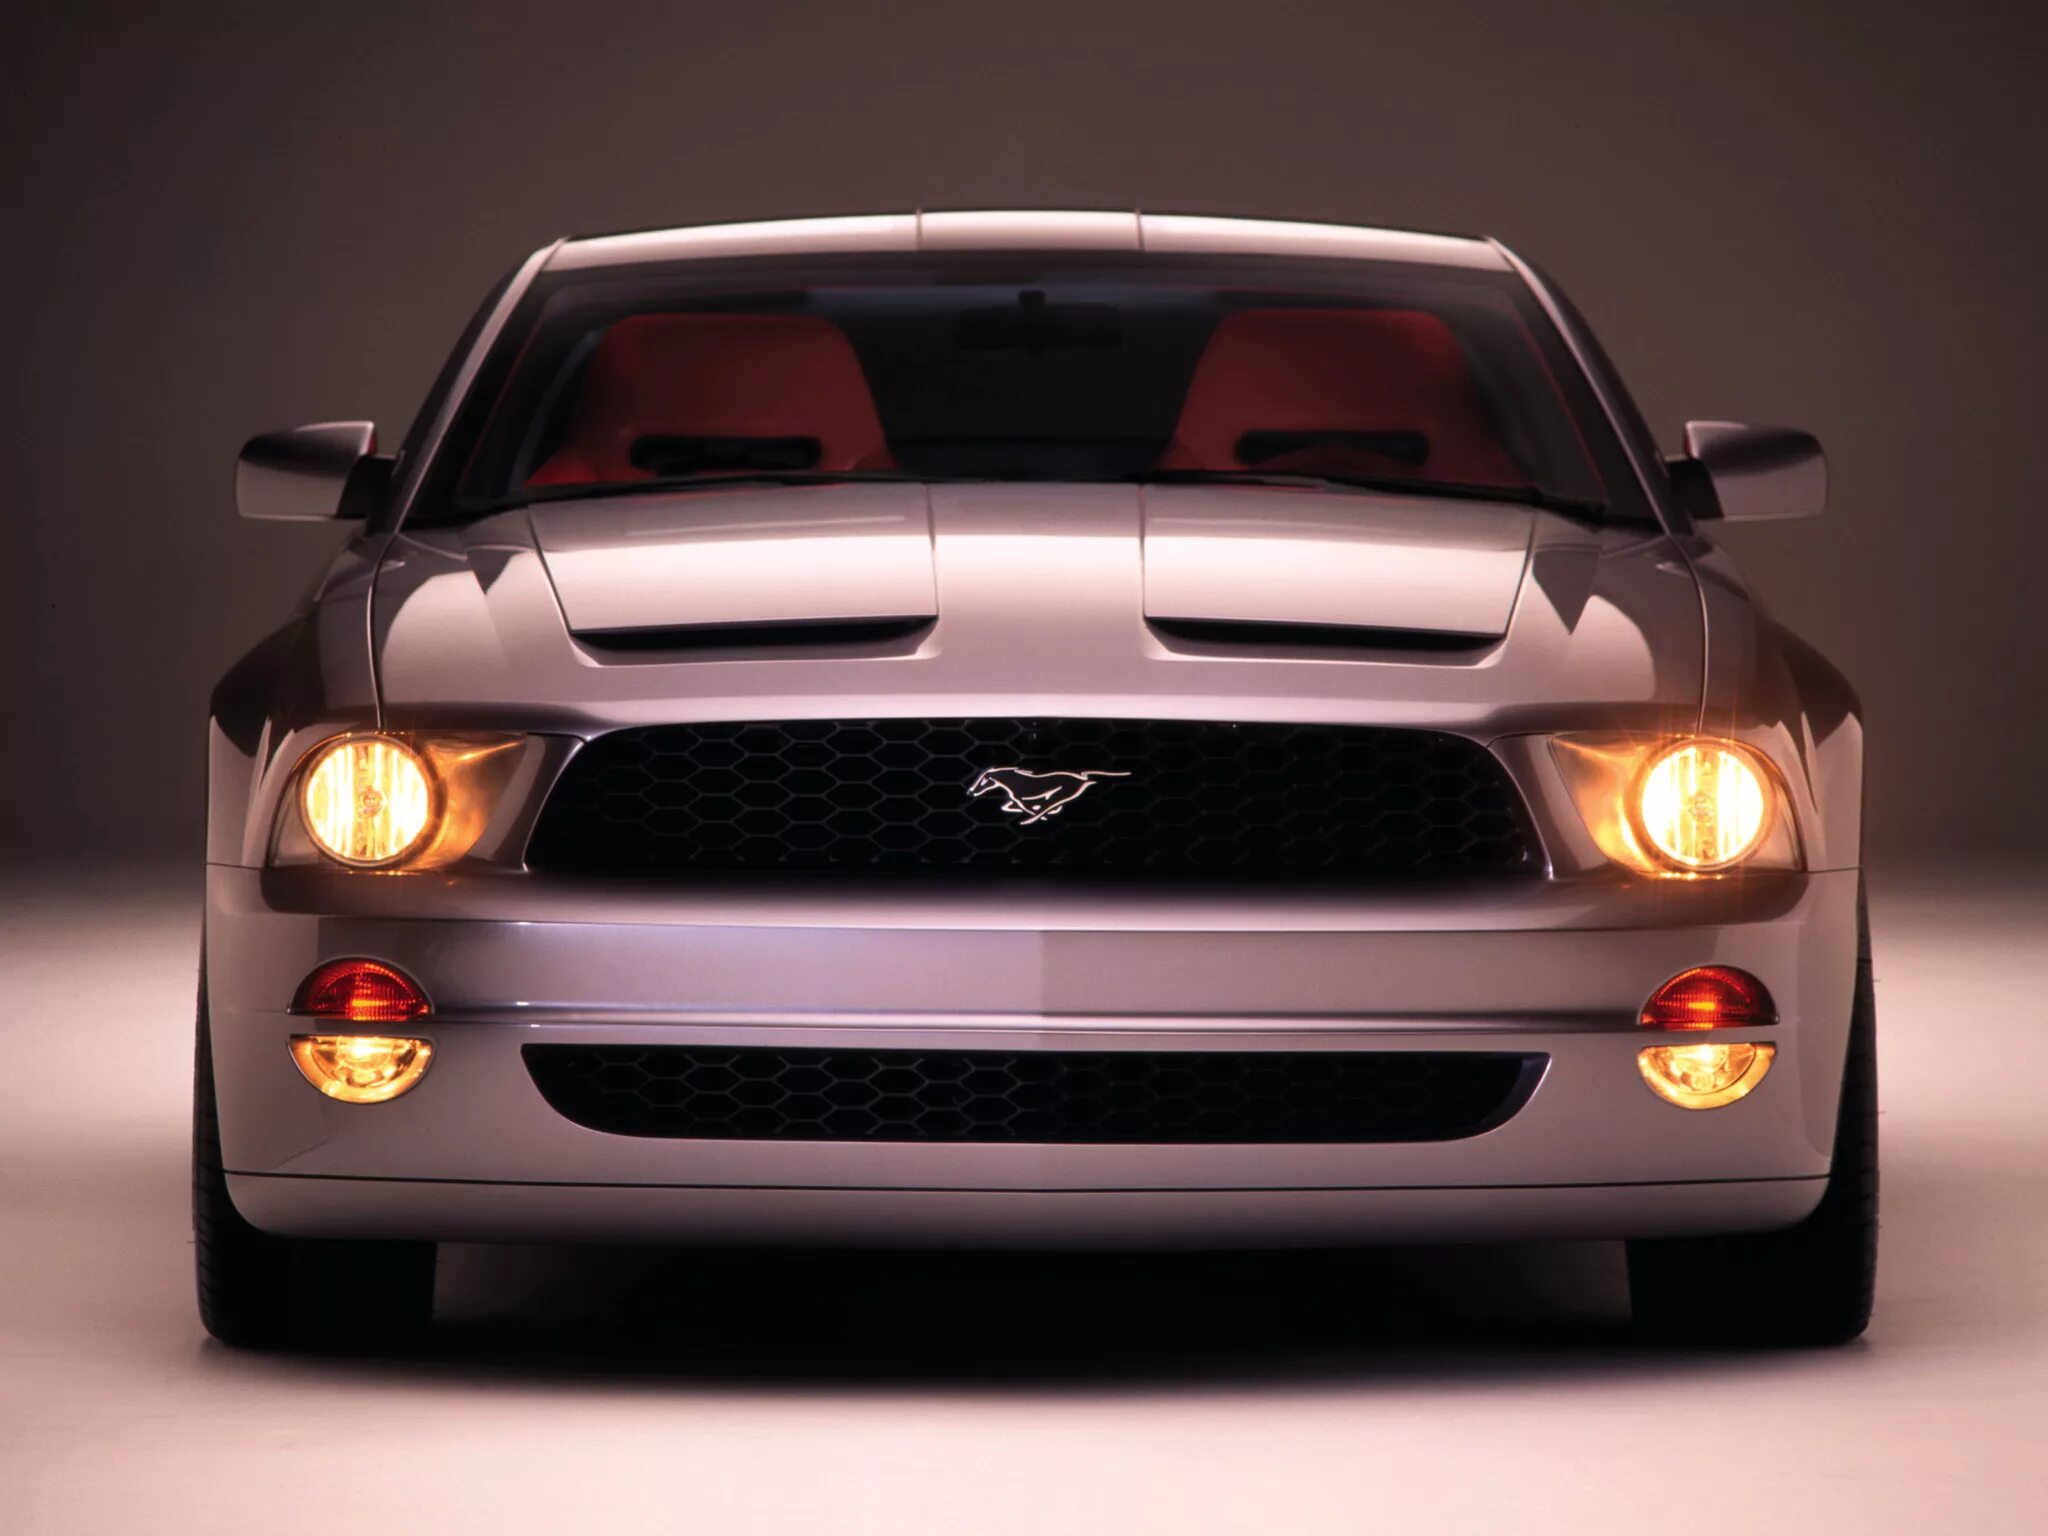 Форд Мустанг 2003 gt. Ford Mustang 2003. Ford Mustang Concept 2003. Ford Mustang gt Concept 2003.